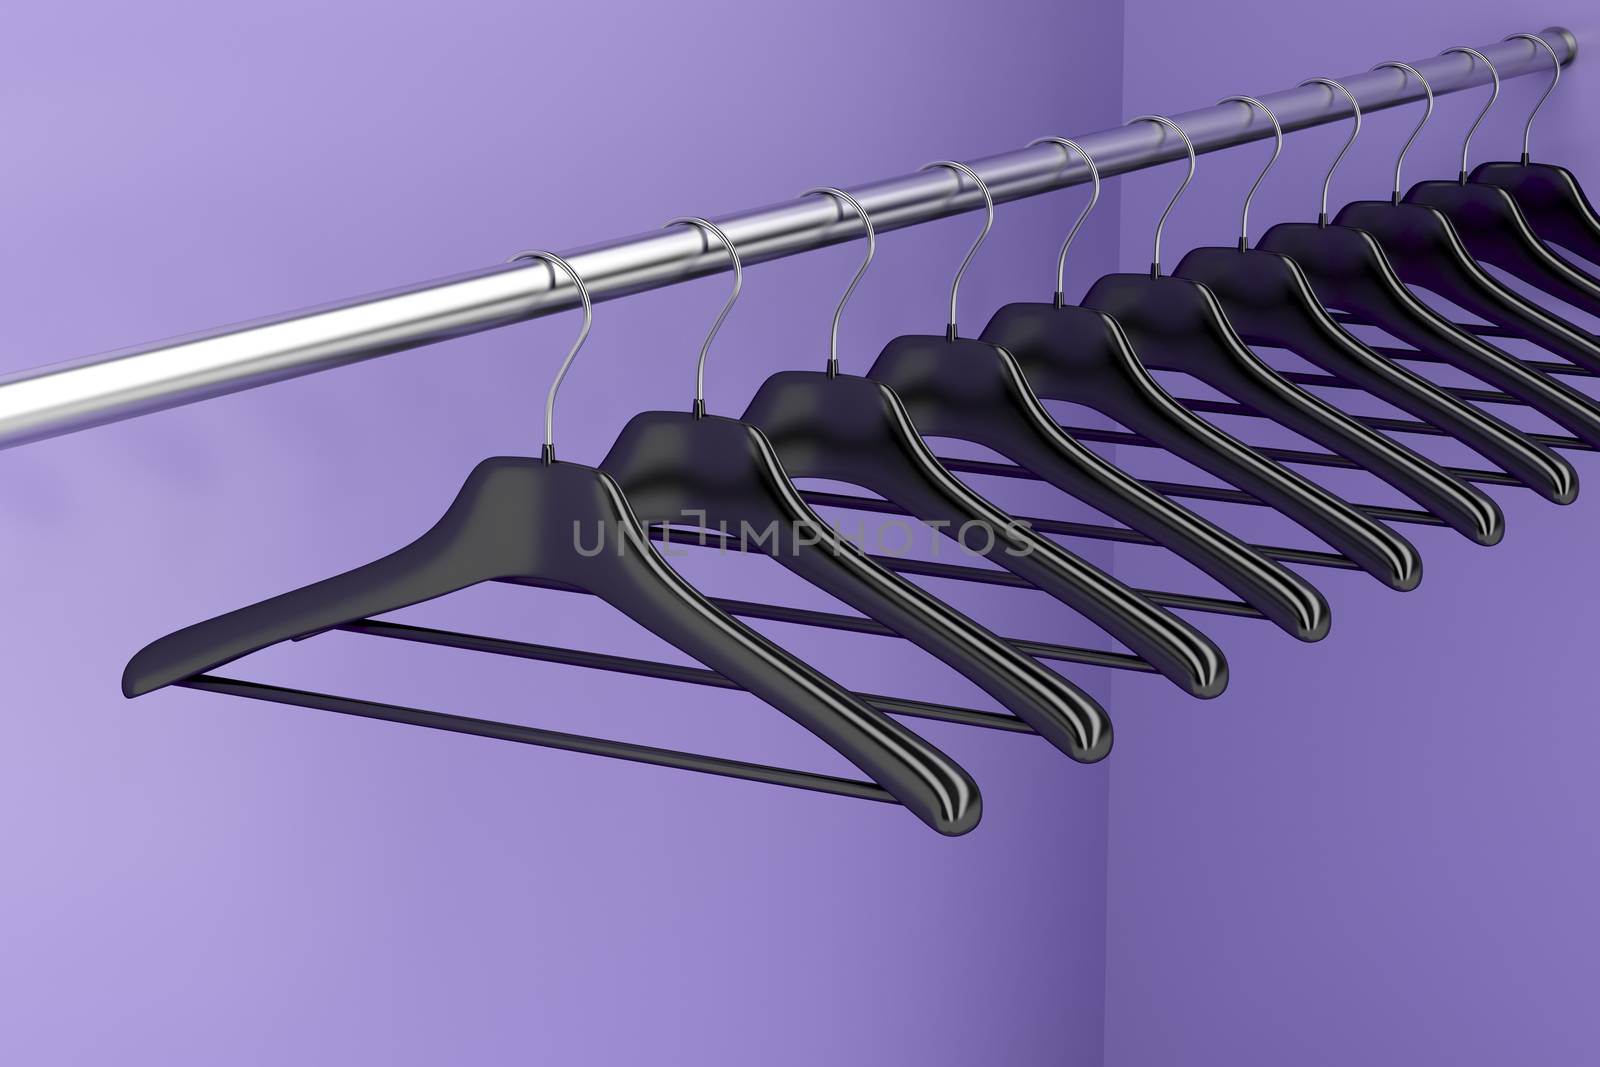 Plastic hangers hanging on rod in the closet